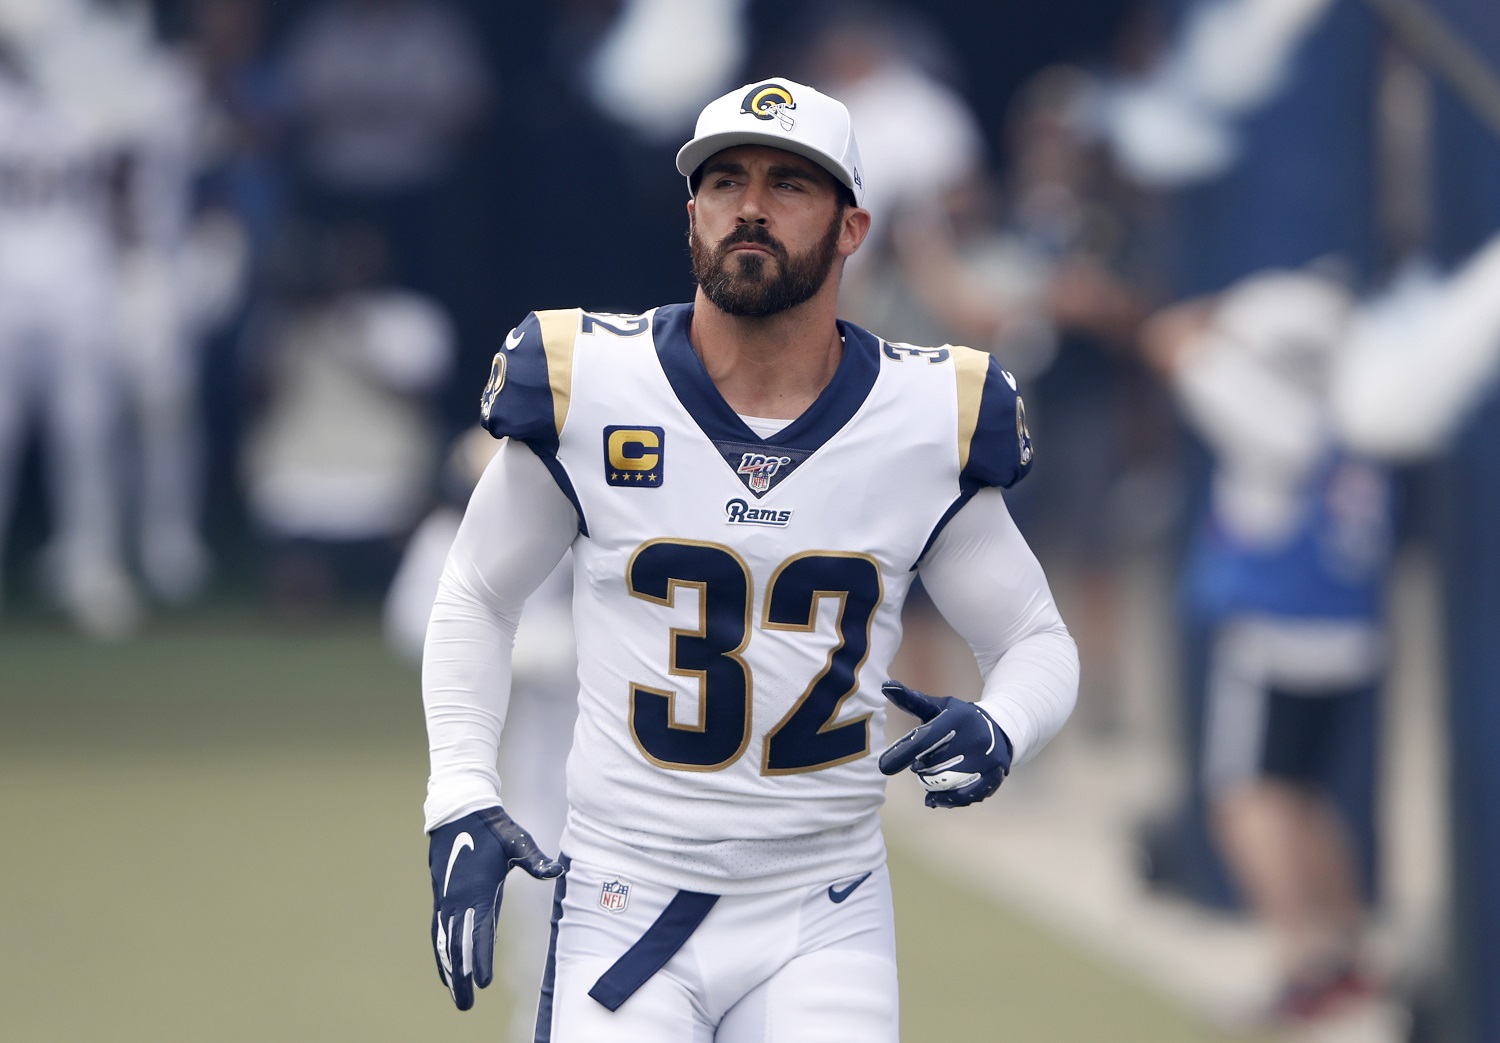 Eric Weddle of the Los Angeles Rams enters the stadium prior to a game against the New Orleans Saints at Los Angeles Memorial Coliseum on Sept. 15, 2019.